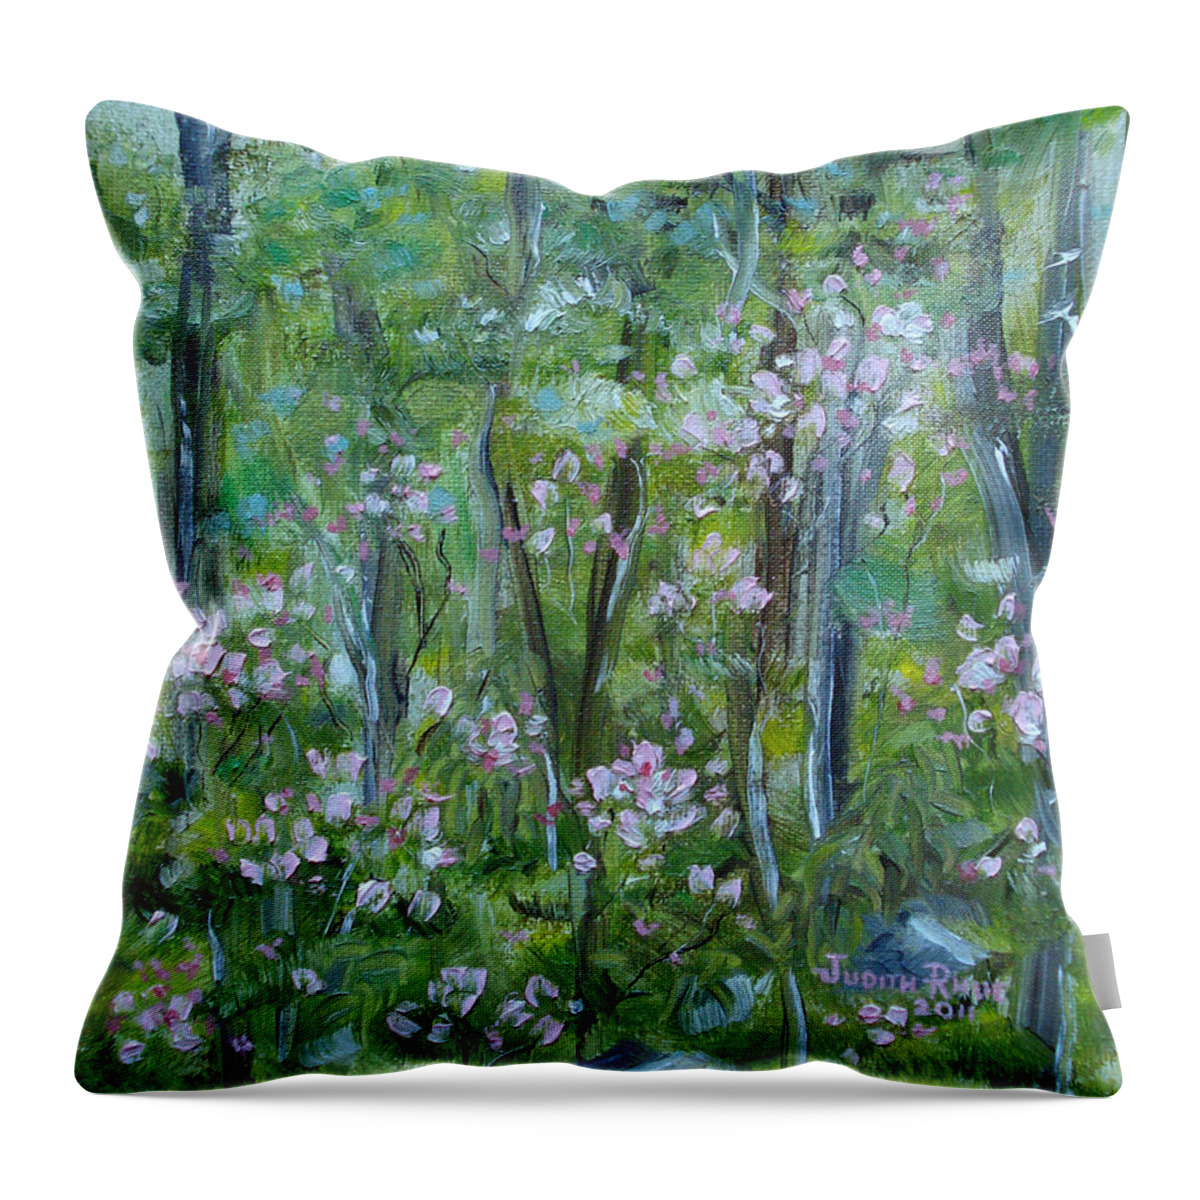 Mountain Laurel Throw Pillow featuring the painting Backyard Mountain Laurel by Judith Rhue